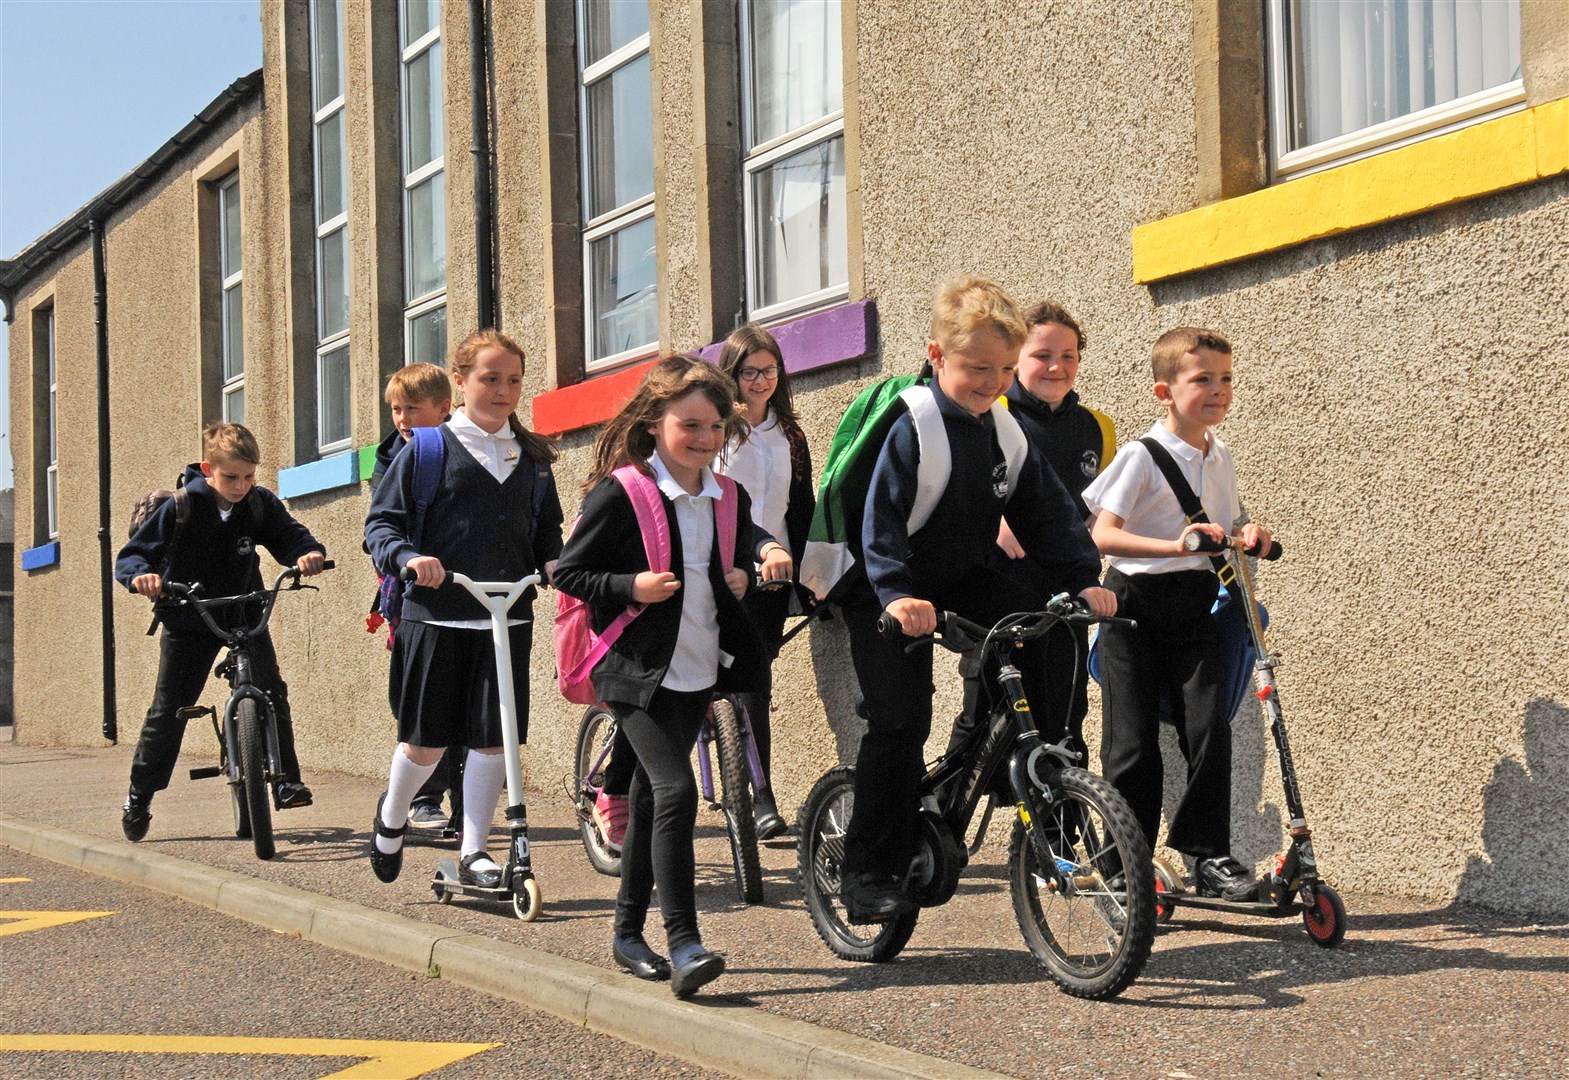 There are many benefits to walking to school experts say.